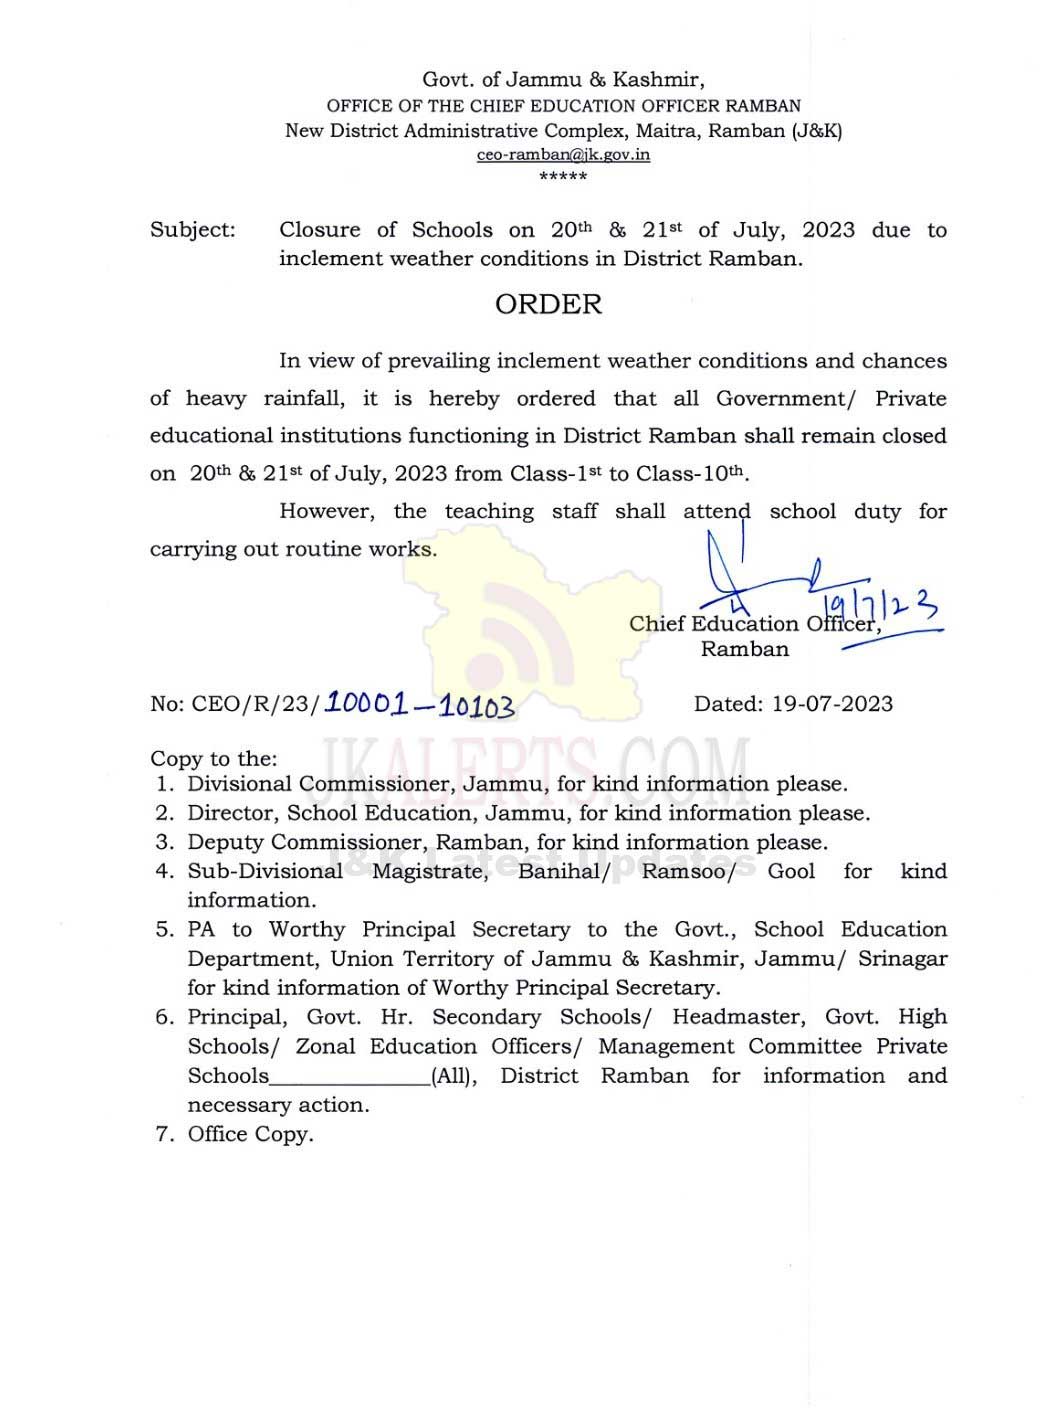 School remain closed on 20th and 21st July in District Ramban.